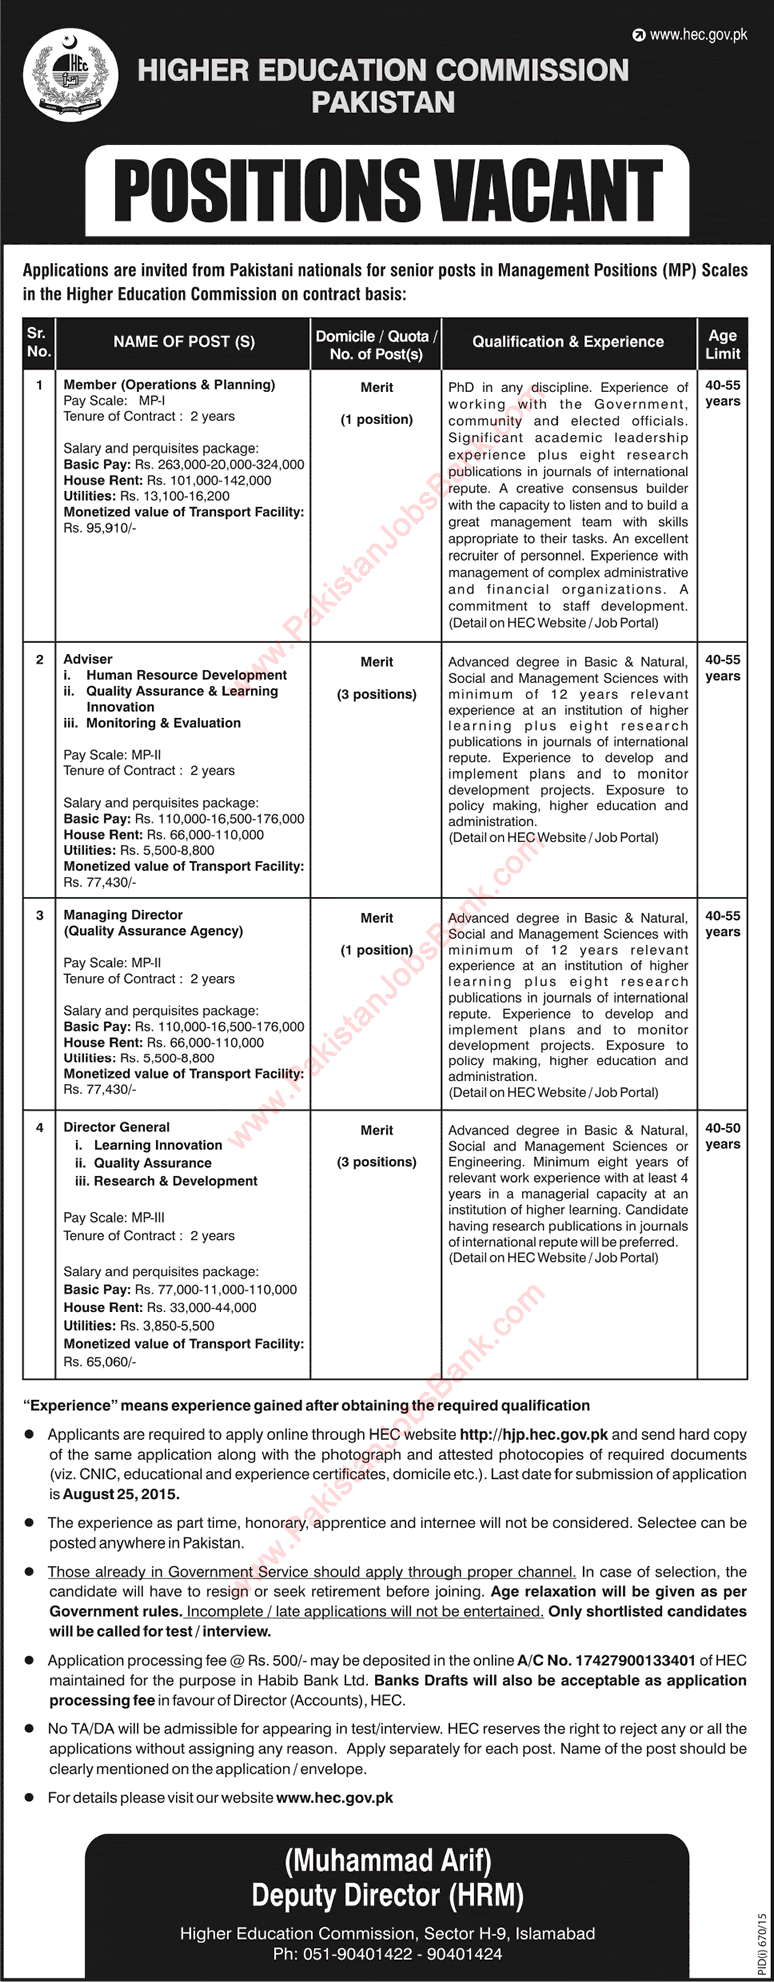 Higher Education Commission Jobs 2015 August HEC Apply Online Member, Advisers & Directors Latest